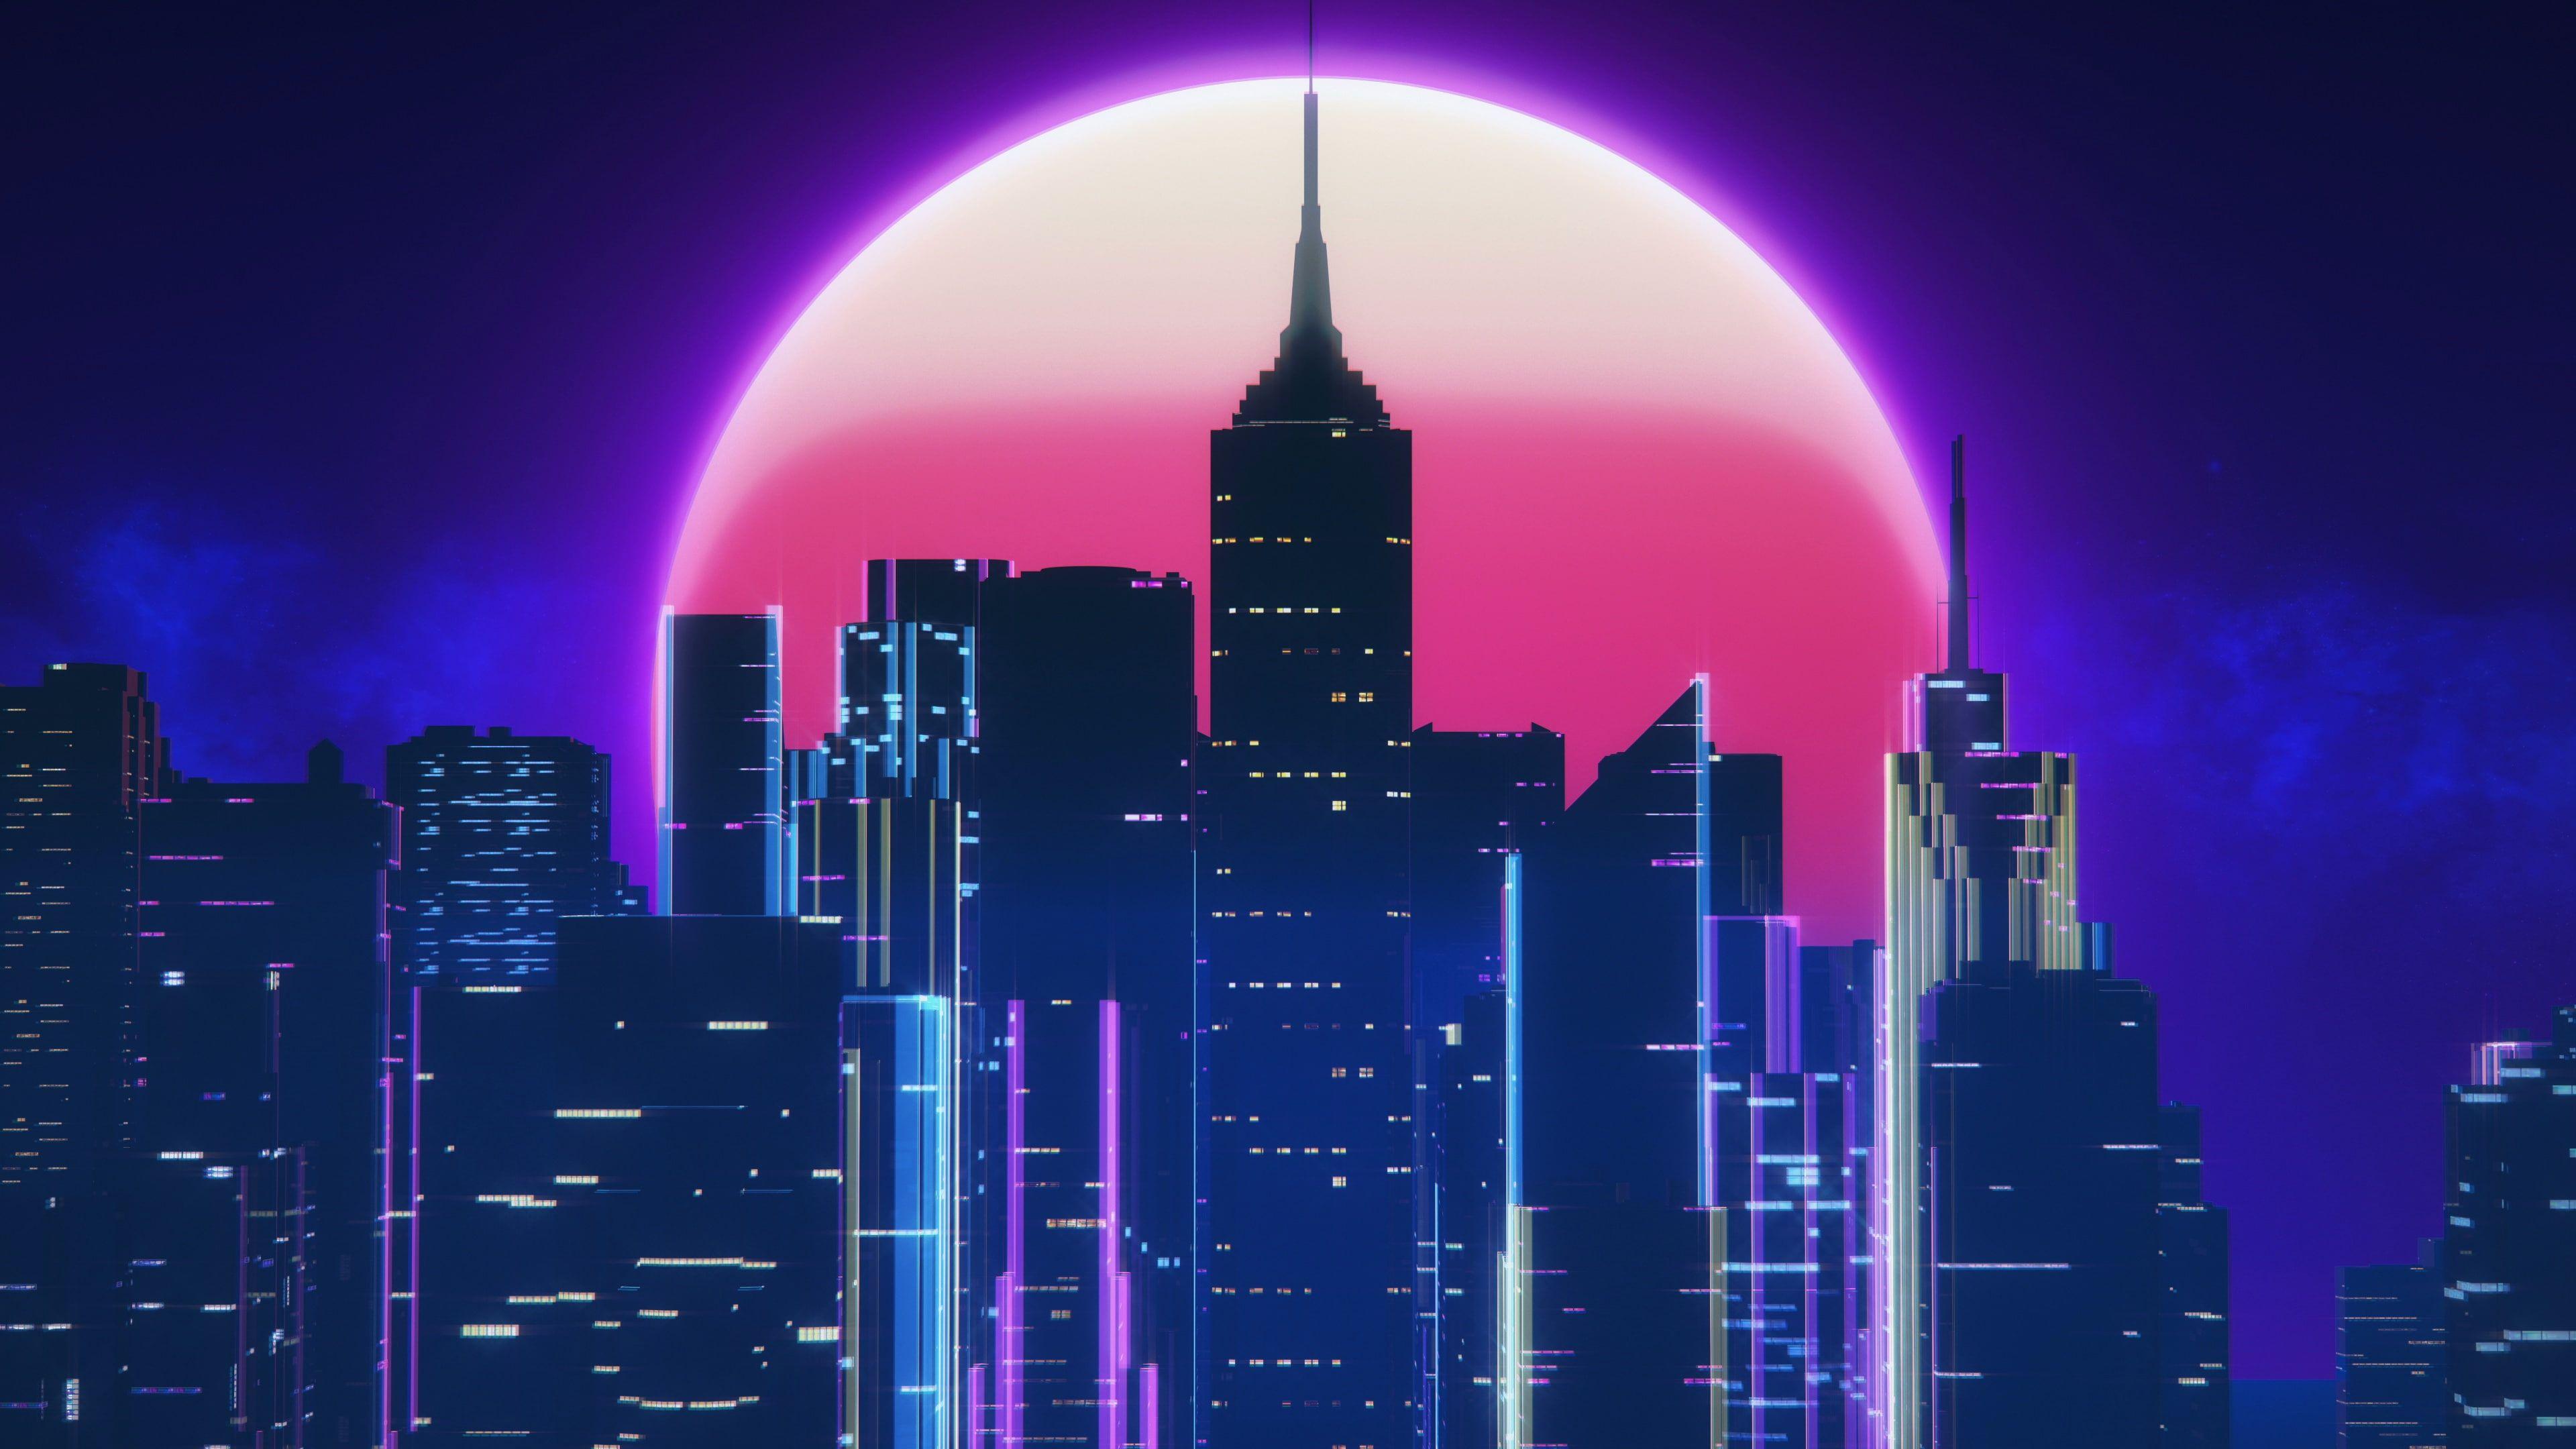 Synth City Wallpapers Top Free Synth City Backgrounds Wallpaperaccess